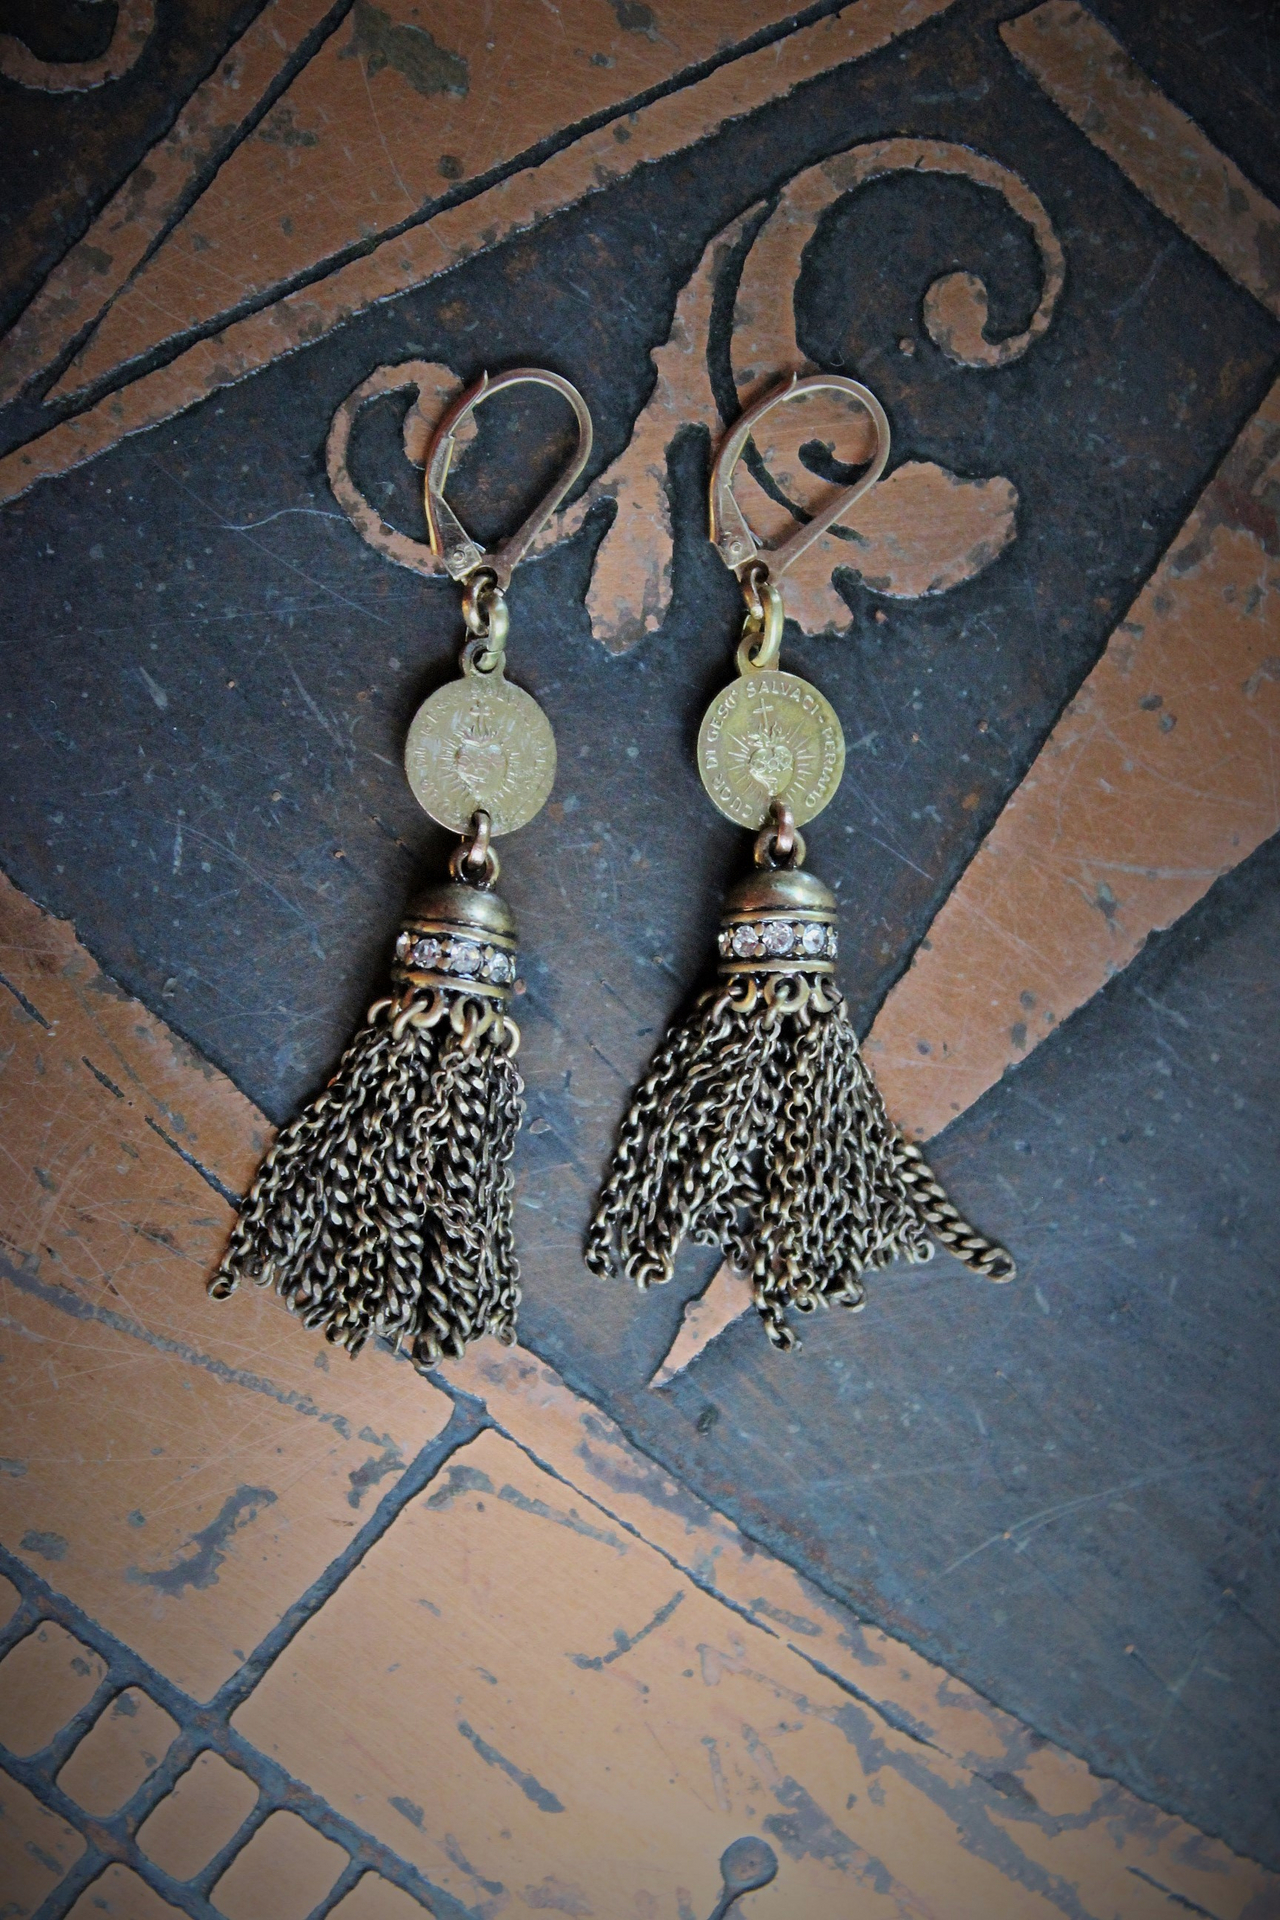 Antique Flaming Sacred Heart Earrings with Unique Rhinestone Chain Tassels & Gold Fill Earring Wires